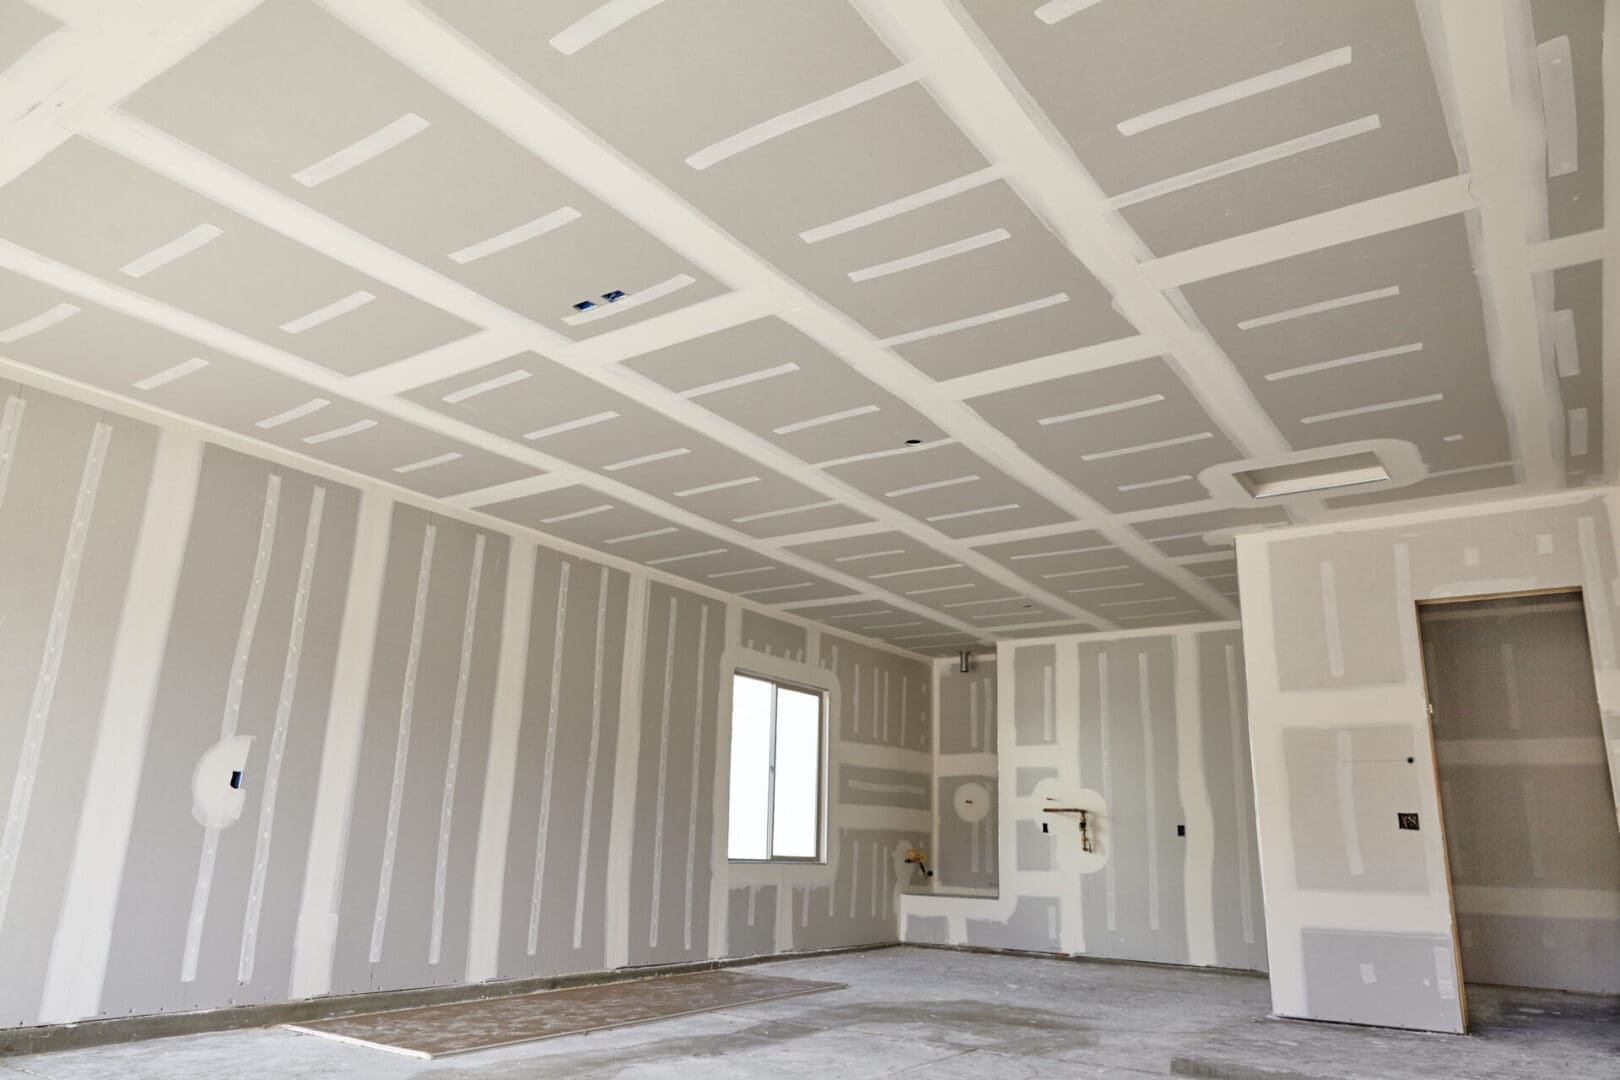 A room with white walls and ceiling in it